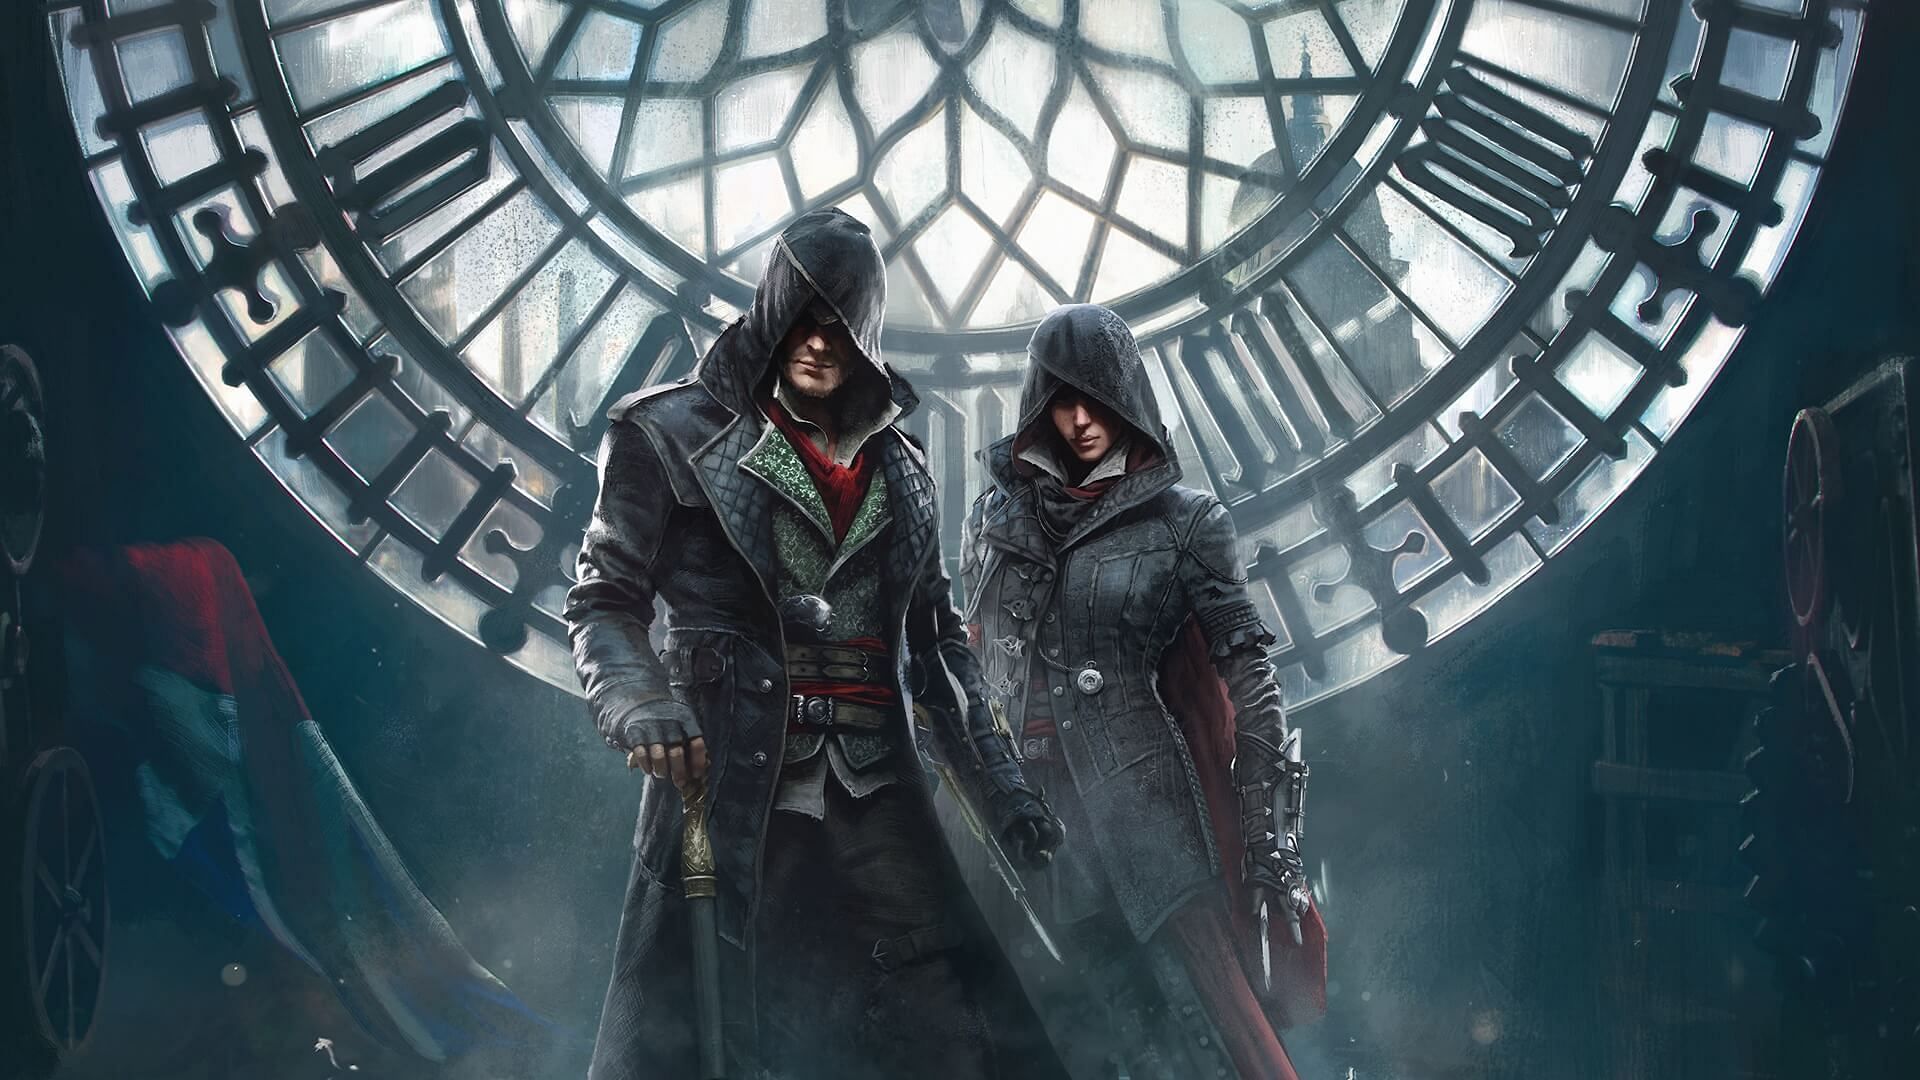 Jacob and Evie Frye, the twin protagonists that took sibling rivalry to a whole new level.